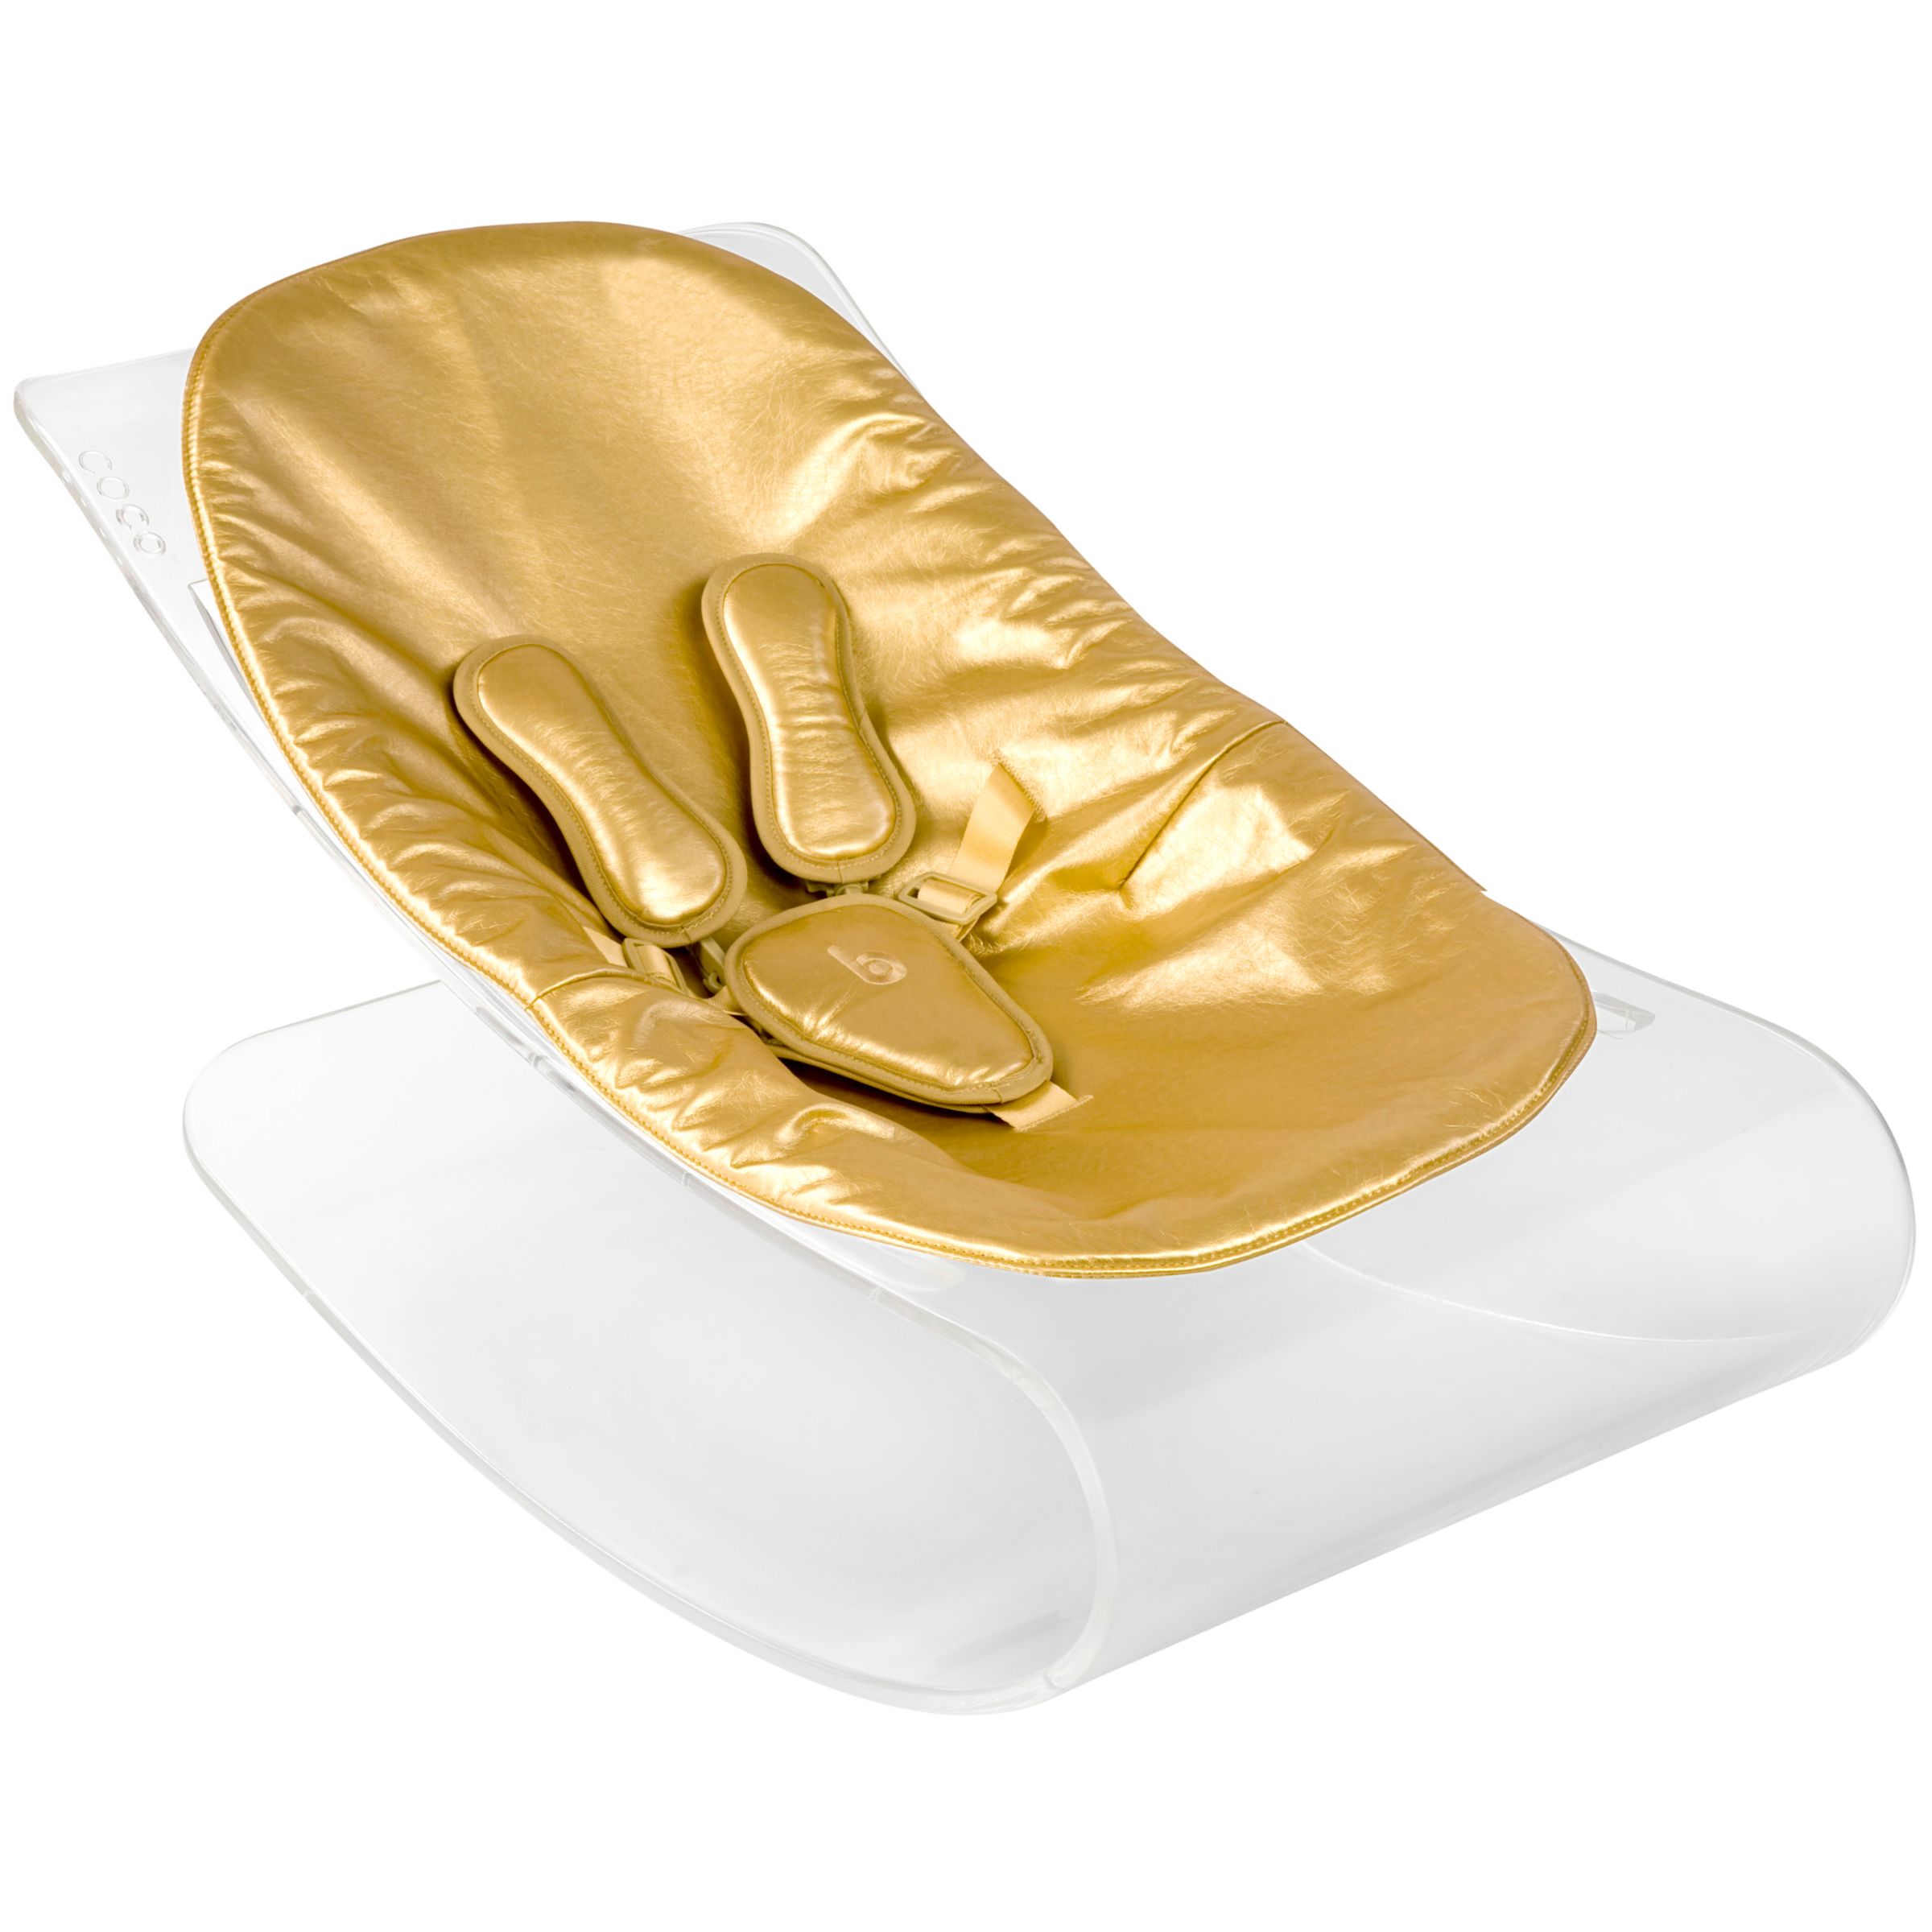 bloom Coco Plexistyle Baby Lounger, Transparent with Solar Gold at JohnLewis